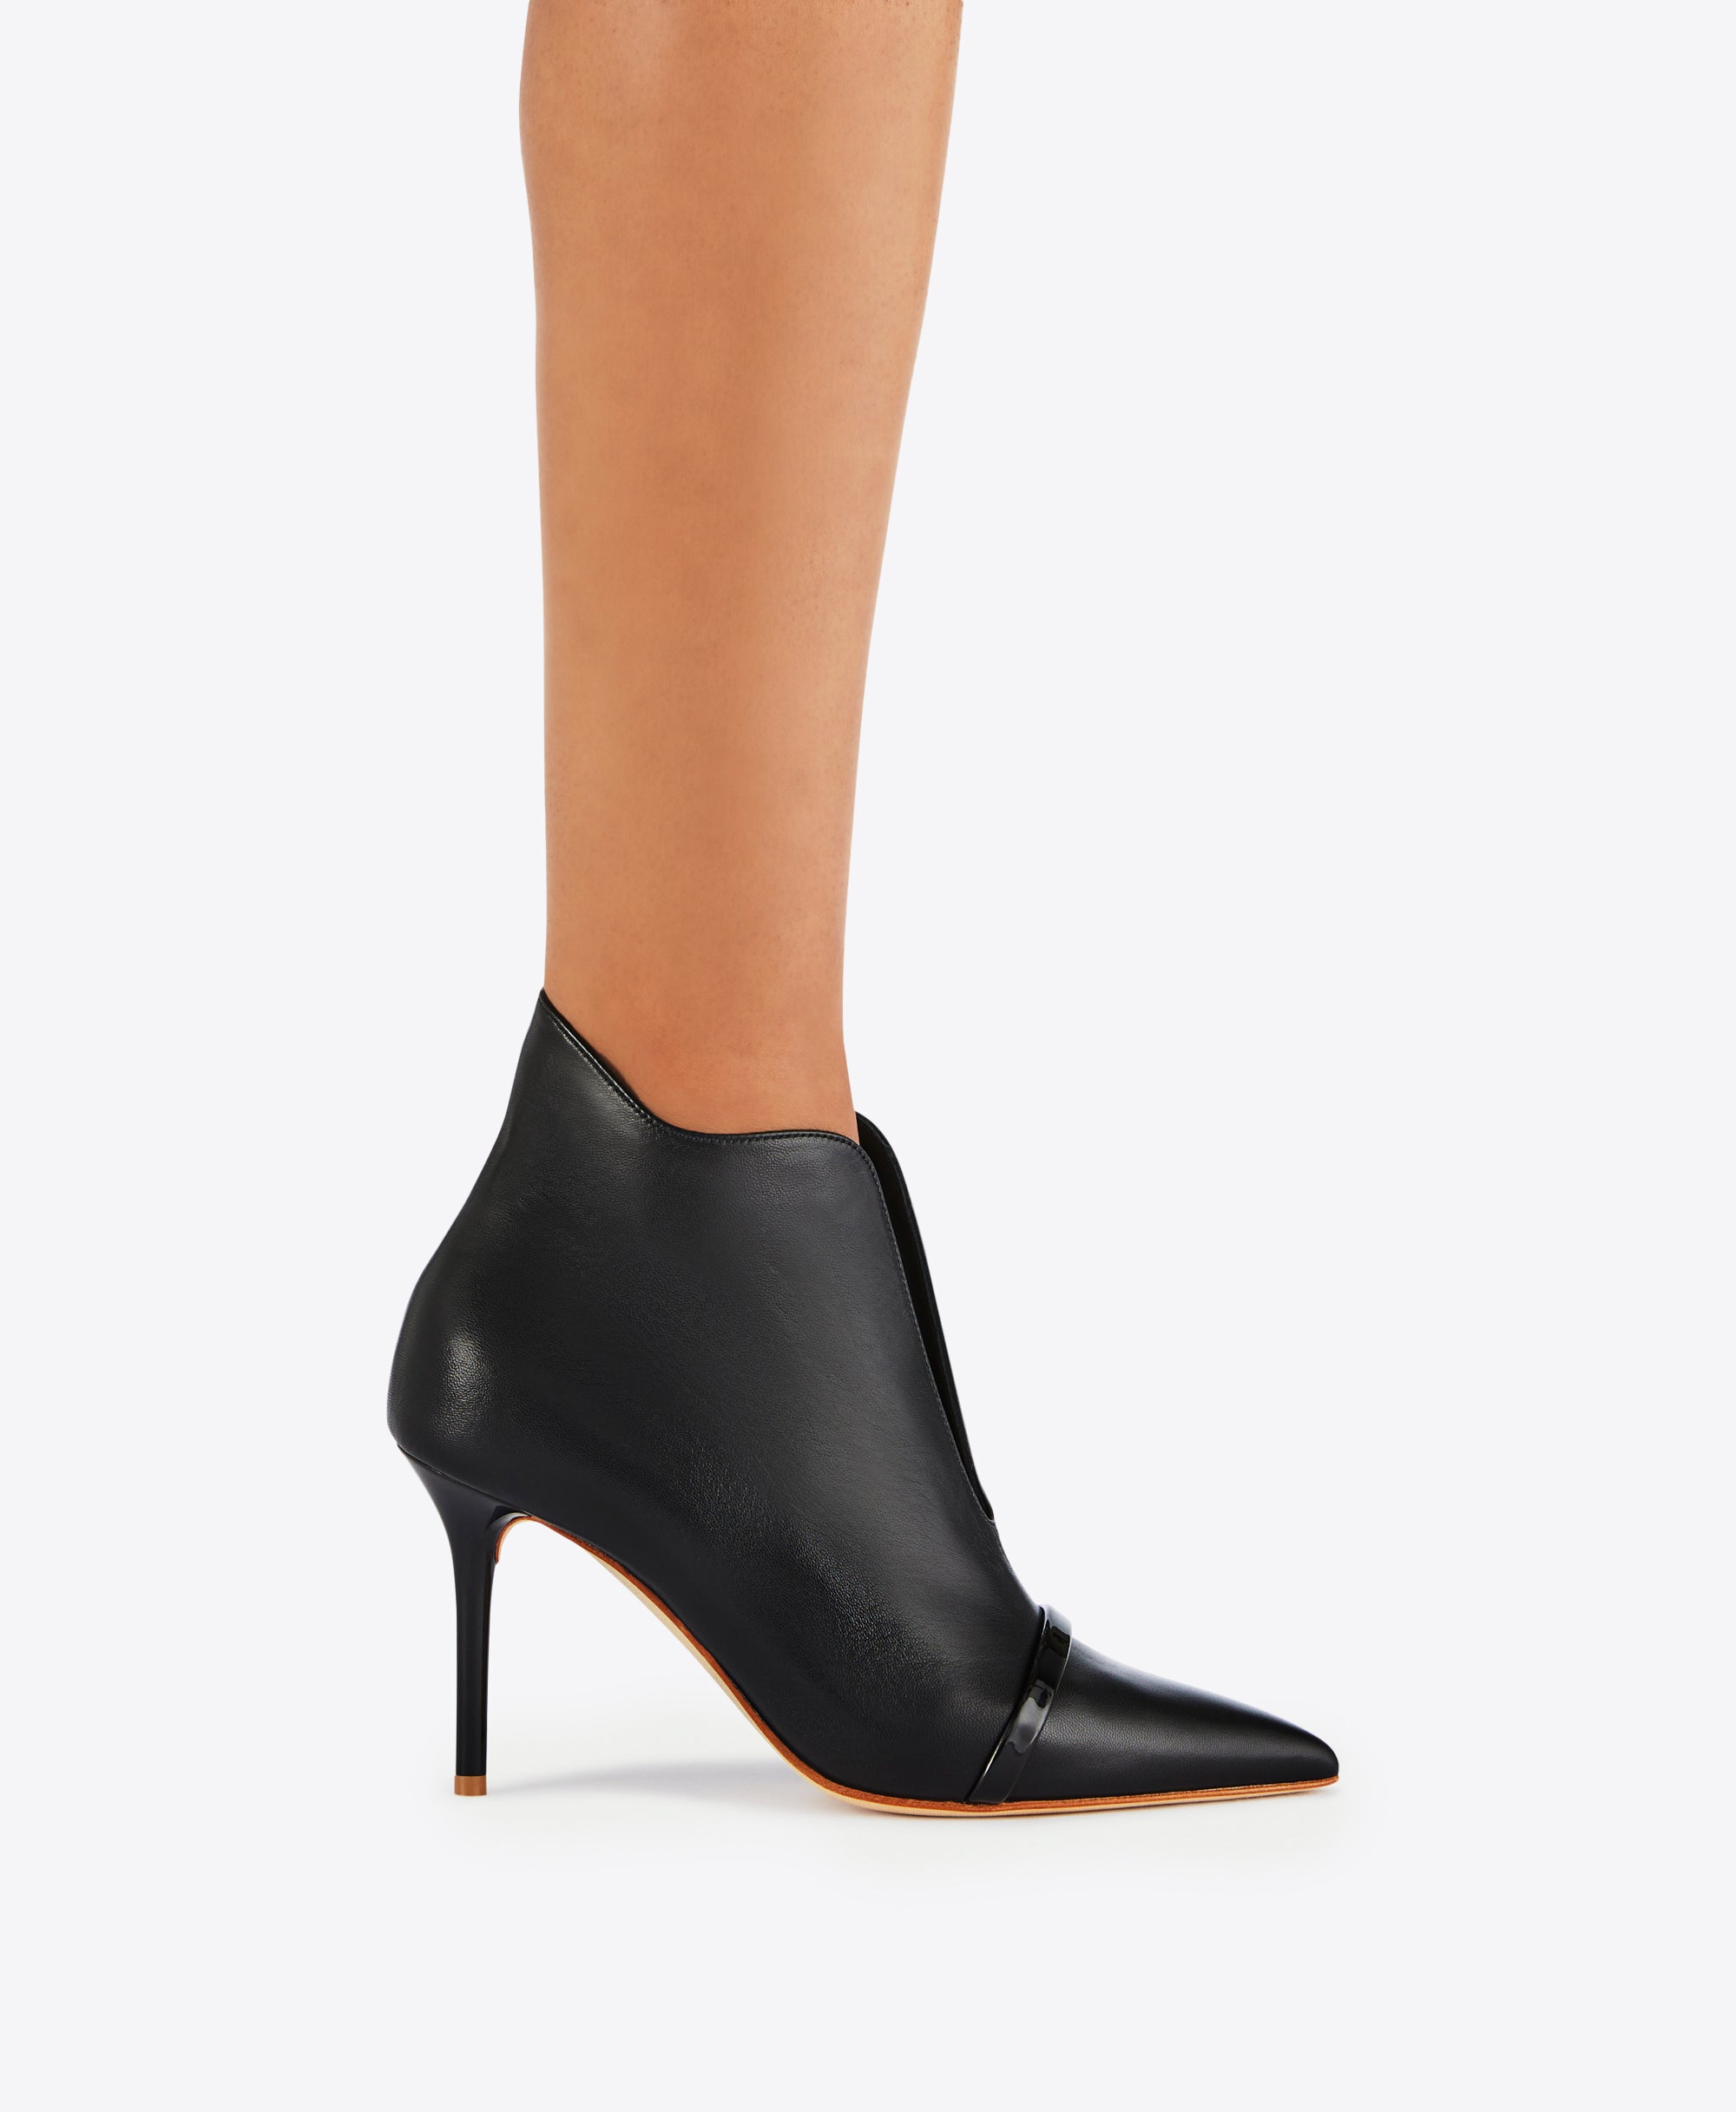 Piper 85 leather ankle boots in black - Gianvito Rossi | Mytheresa